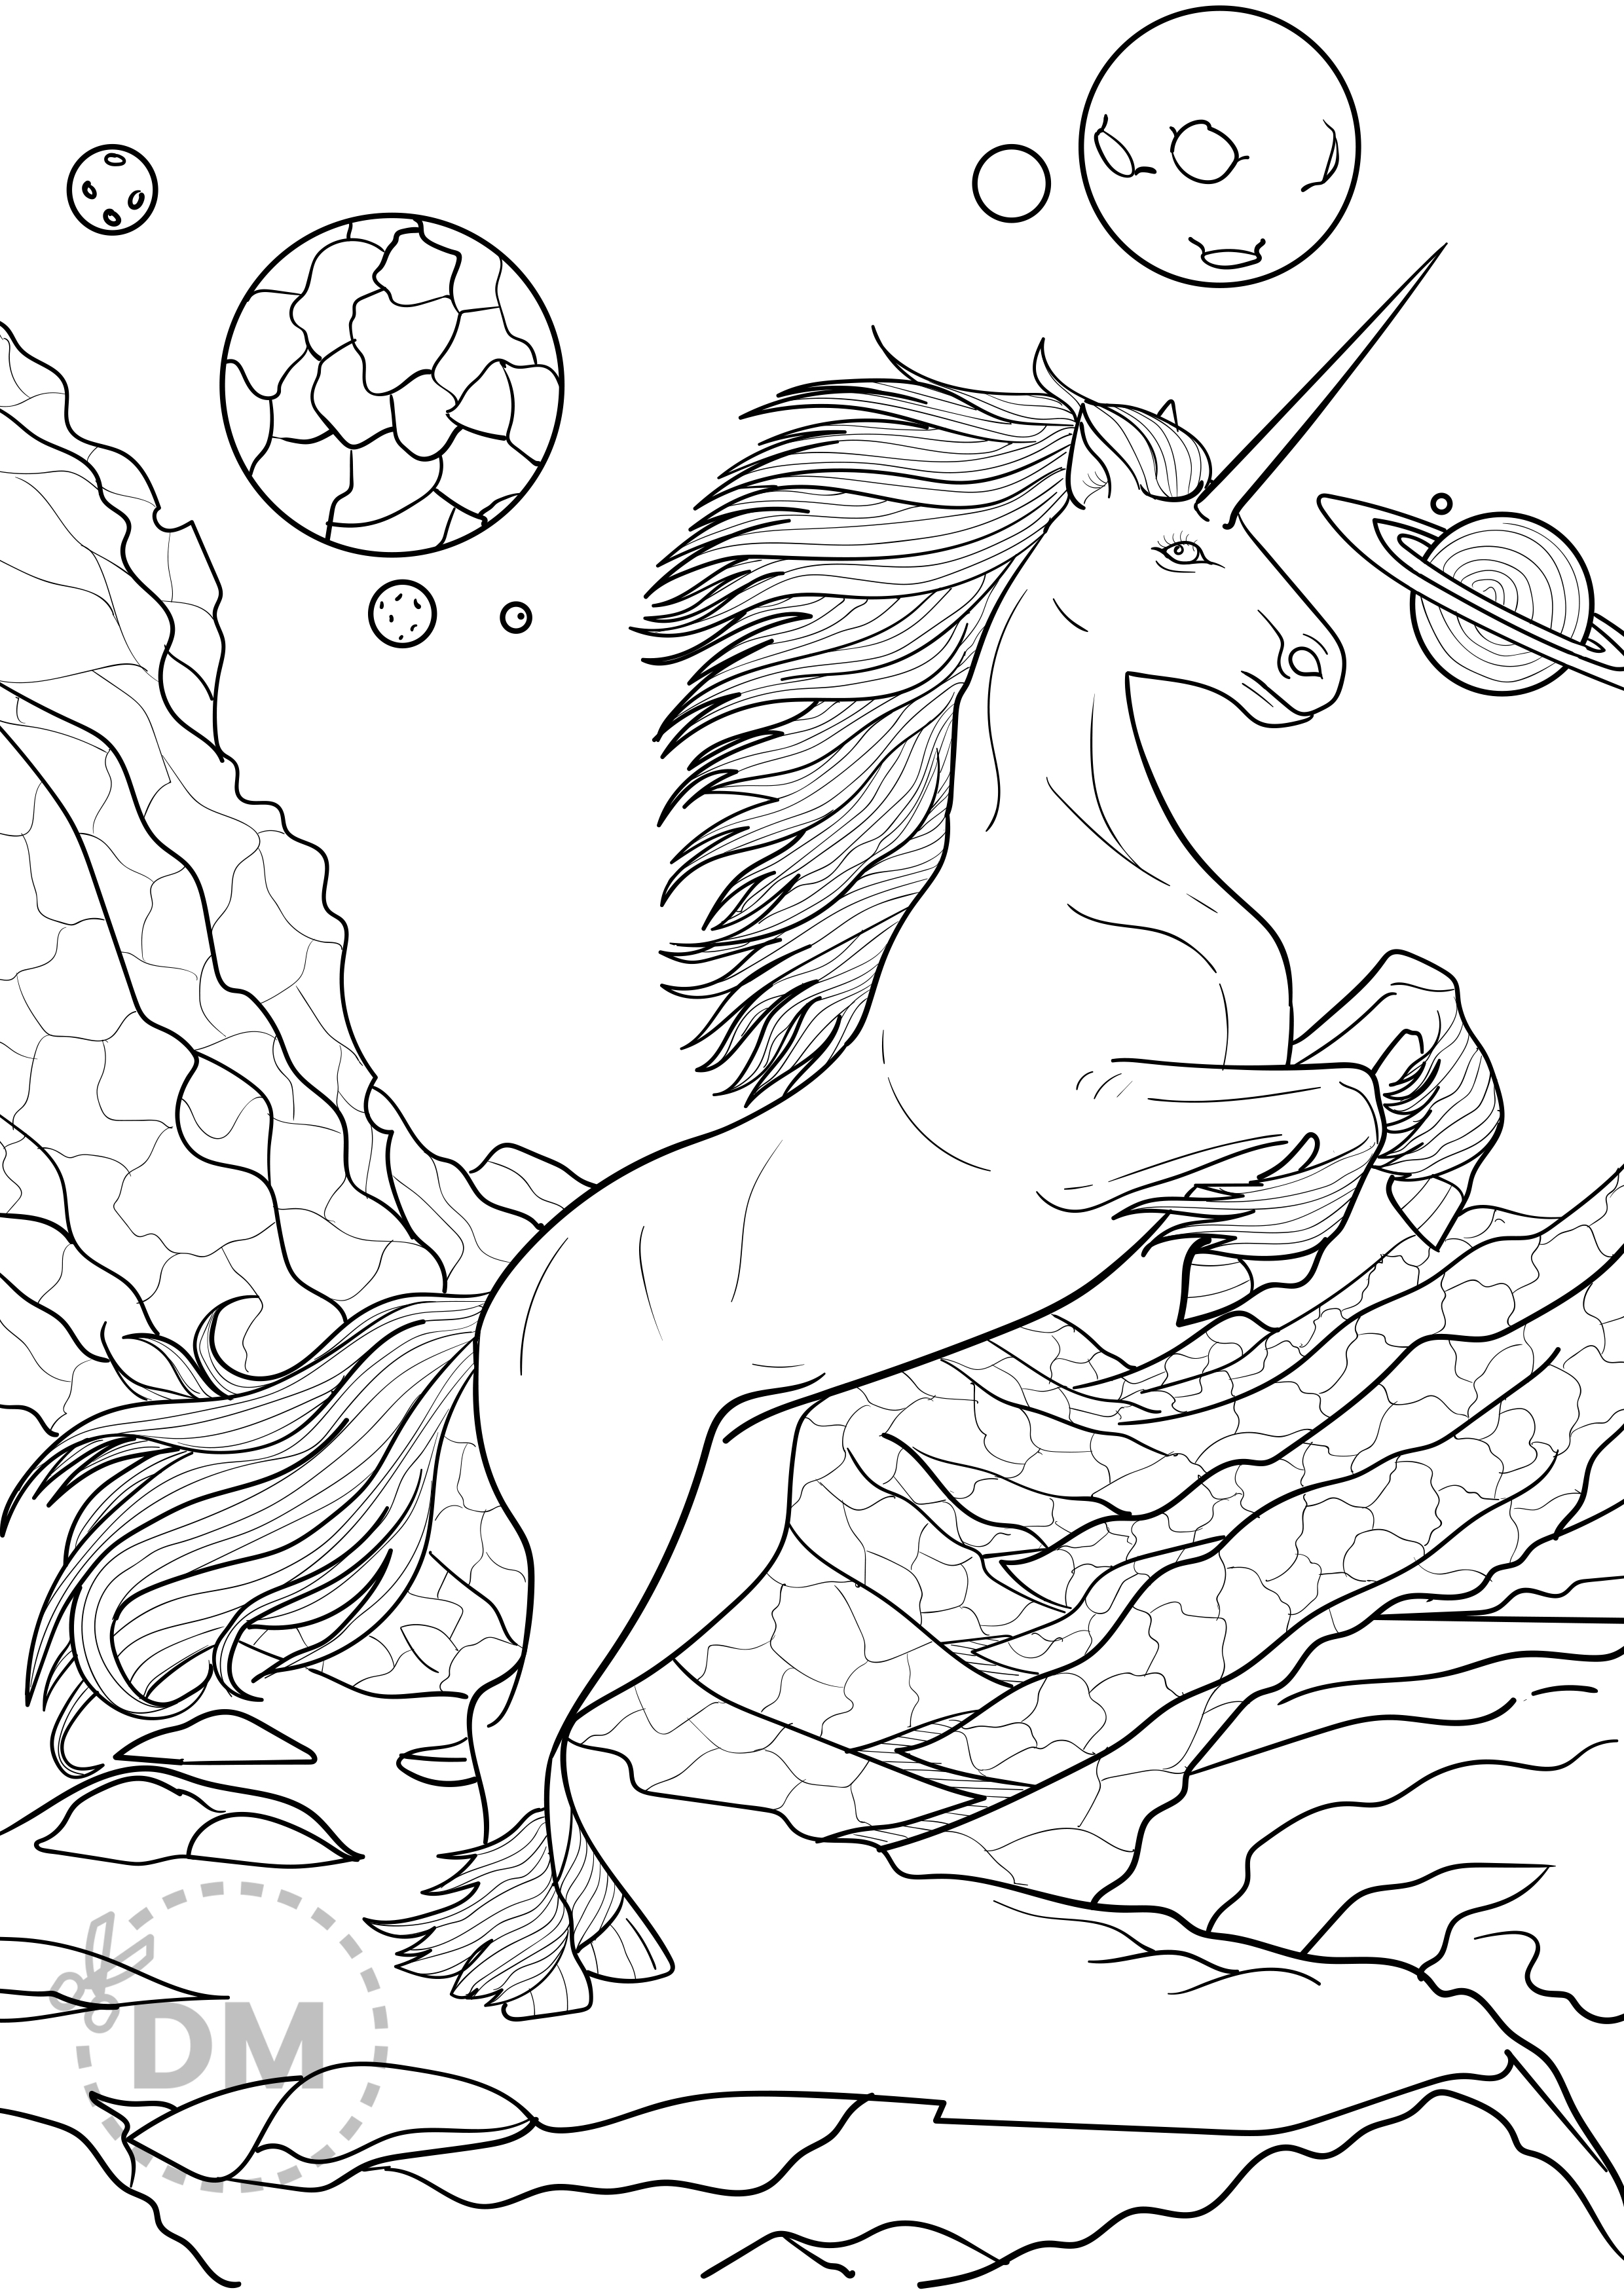 Unicorn Coloring Page for Adults   Printable Page for Download ...